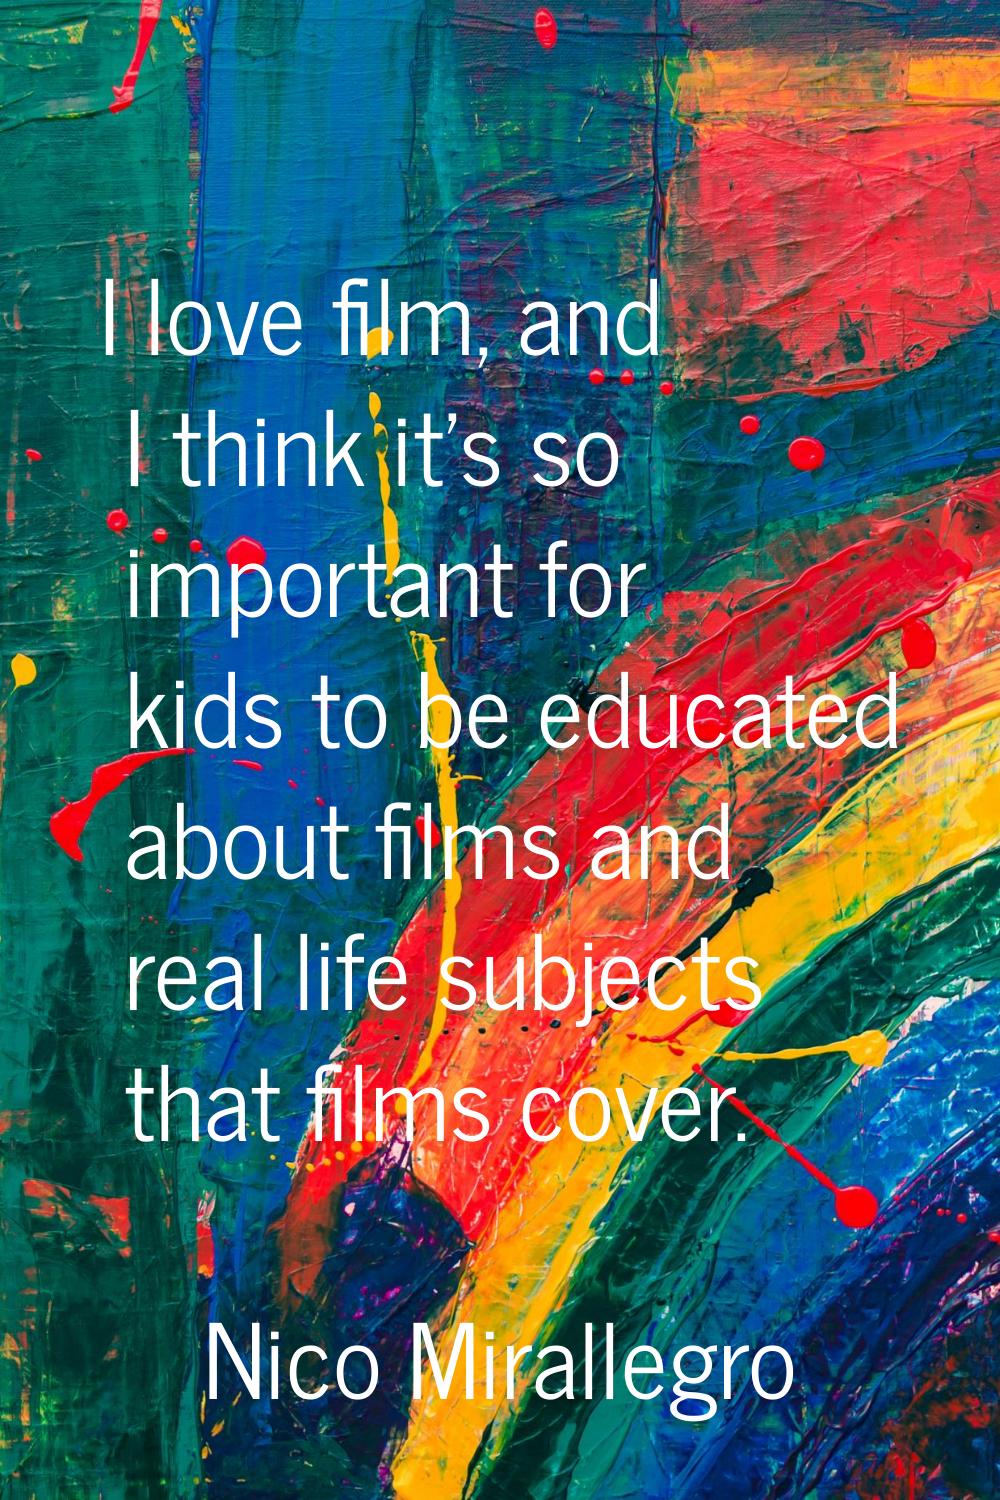 I love film, and I think it's so important for kids to be educated about films and real life subjec